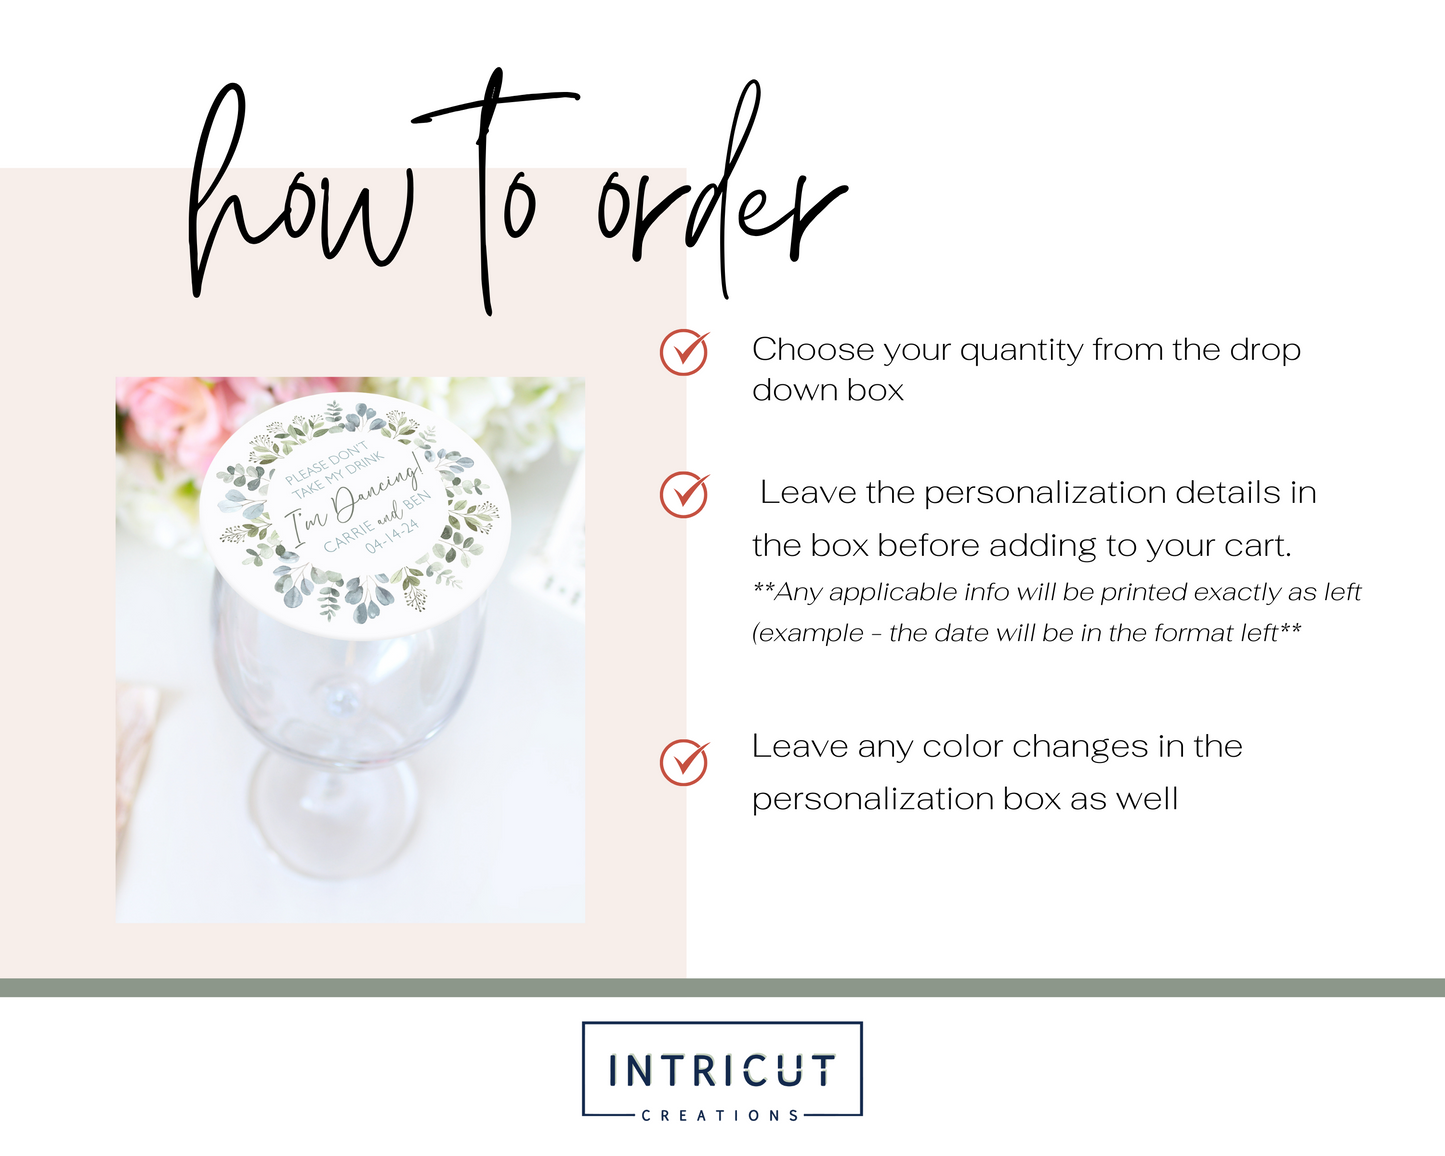 how to order: choose your shape and quantity, leave the details to be printed (colors may not be changed)